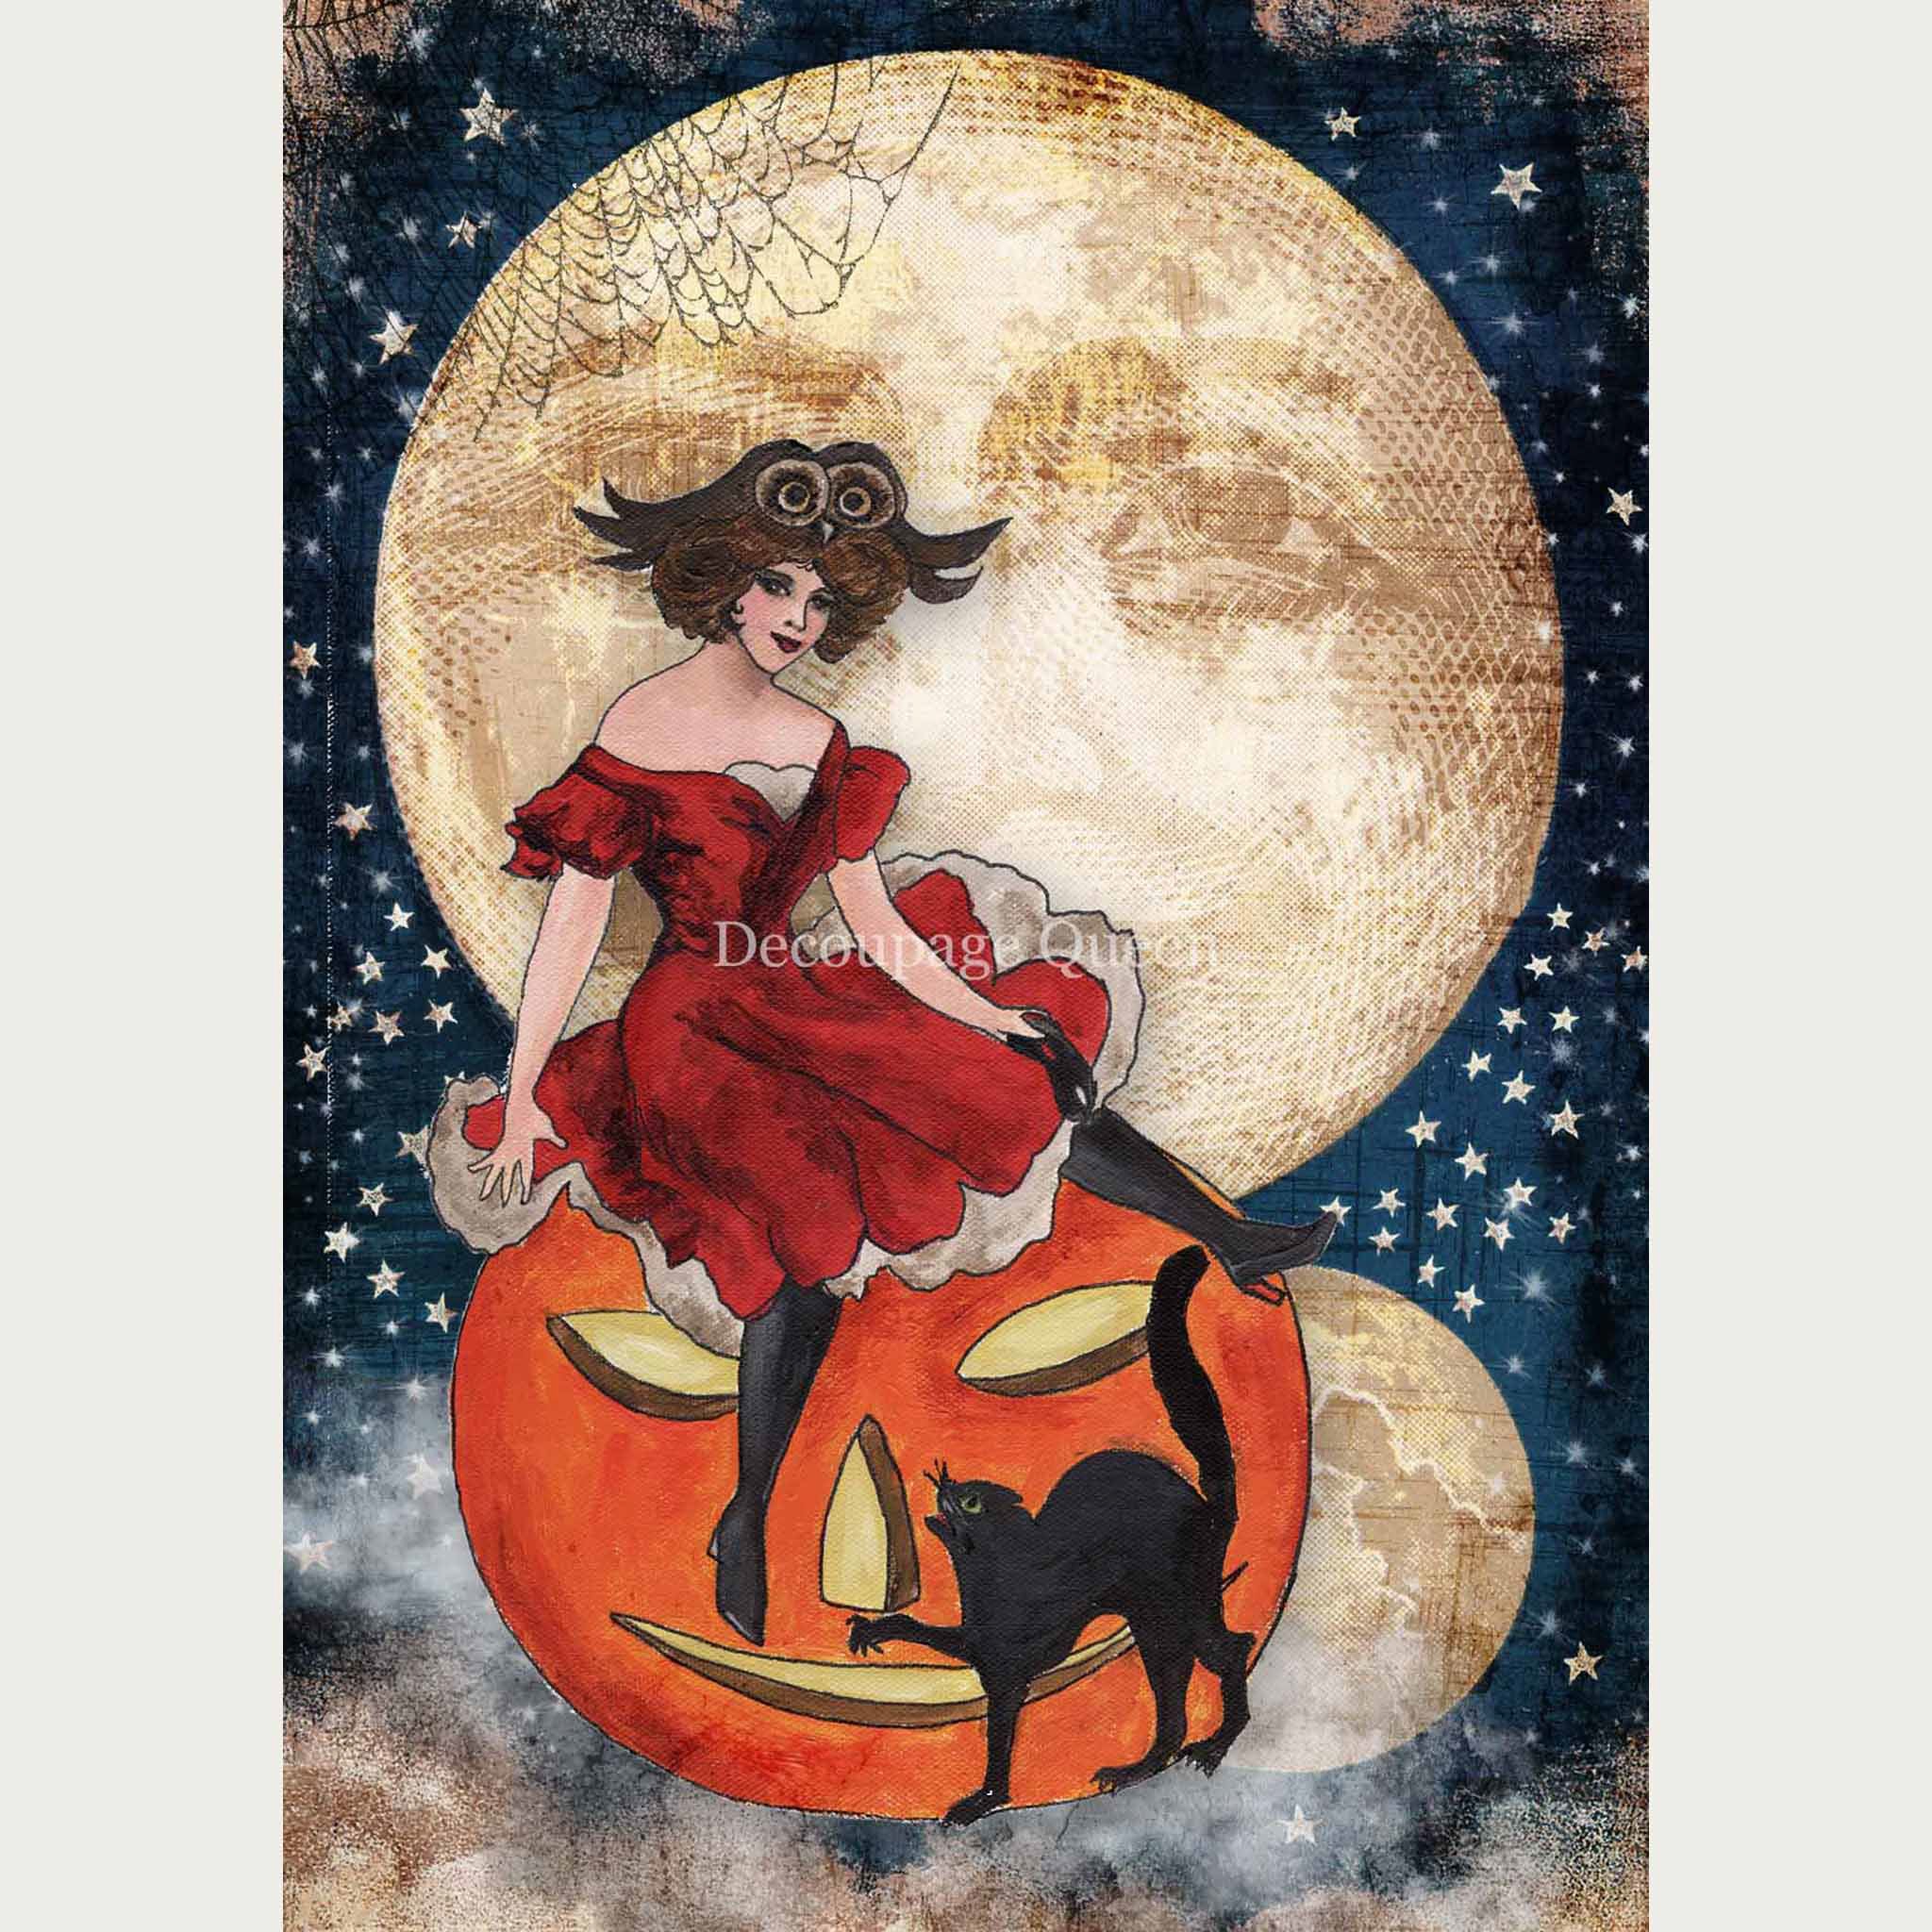 Rice paper design that features a pinup witch in a red dress on a jack-o-lantern under the full moon. White borders are on the sides.